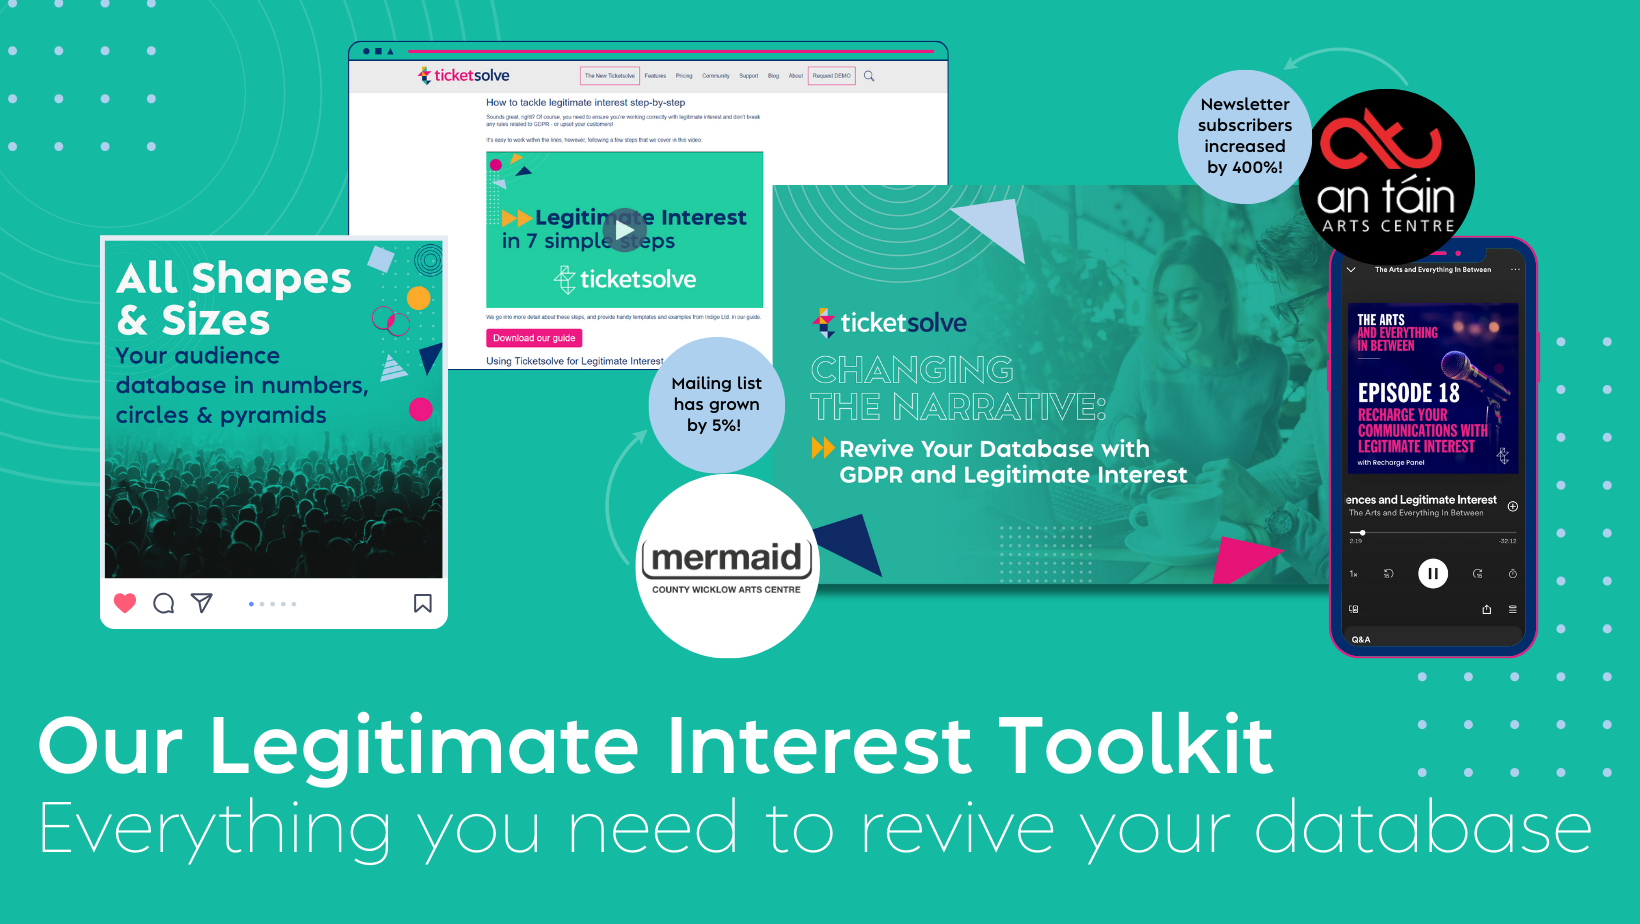 Our Legitimate Interest Toolkit: everything you need to revive your database